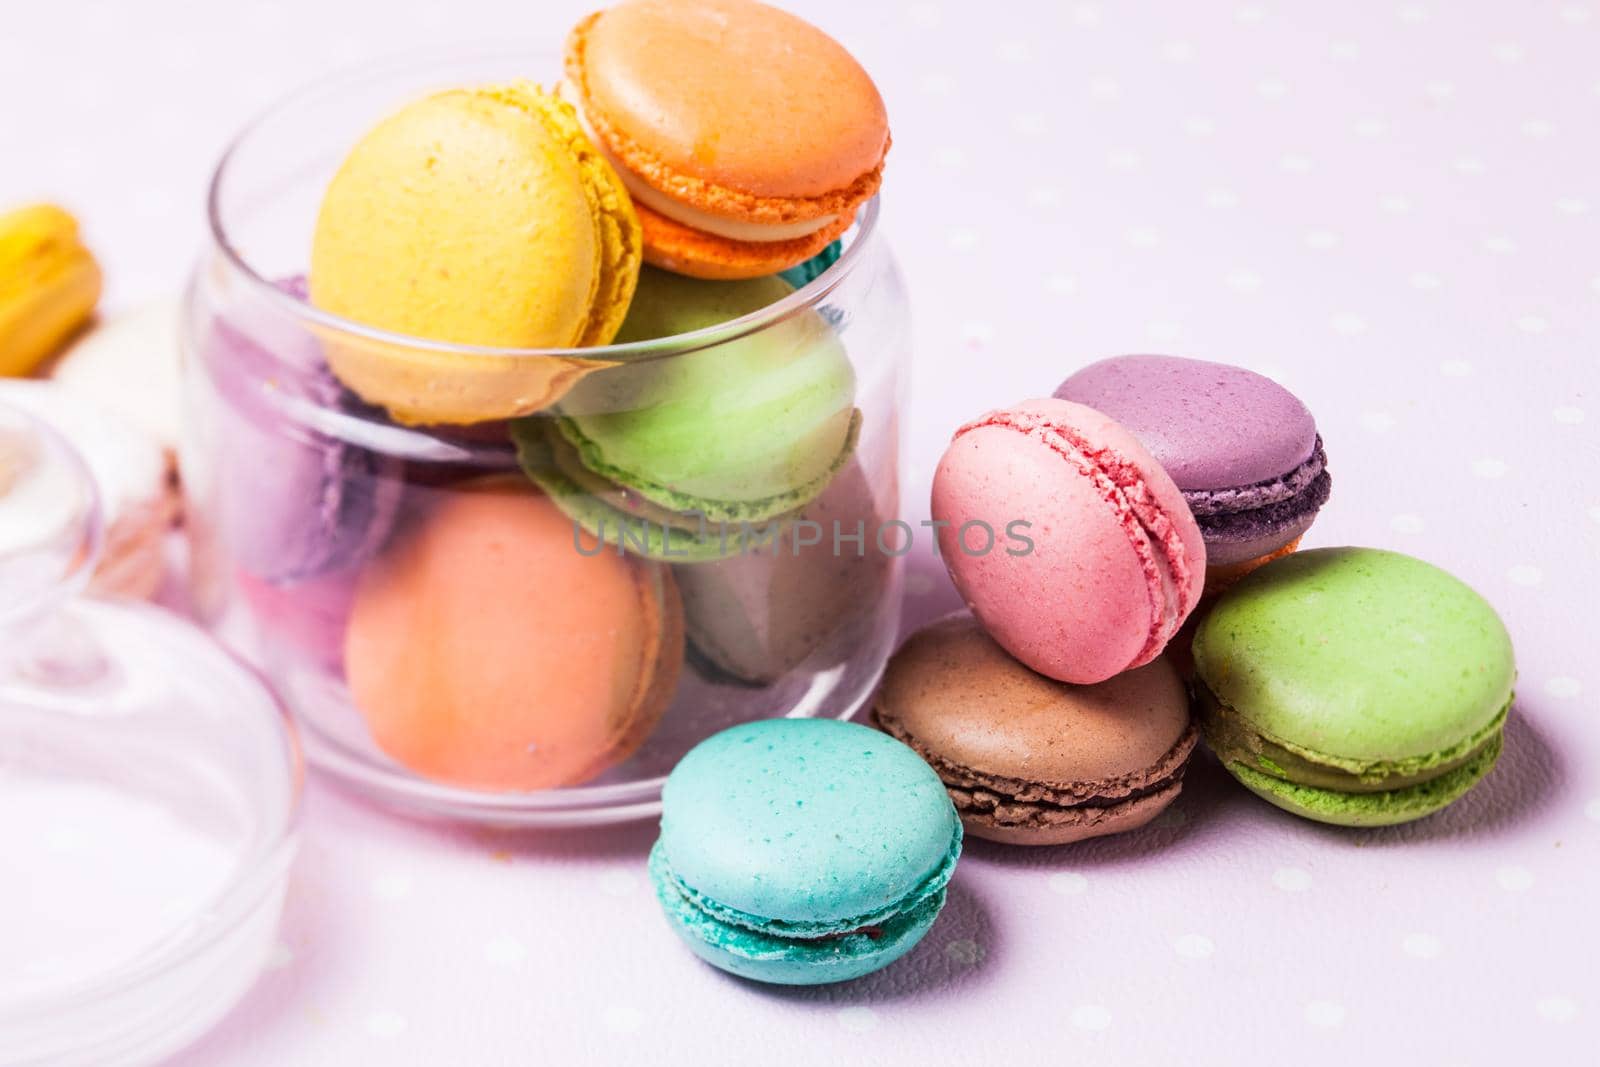 Colorful macaroons - french dessert in a glass jar